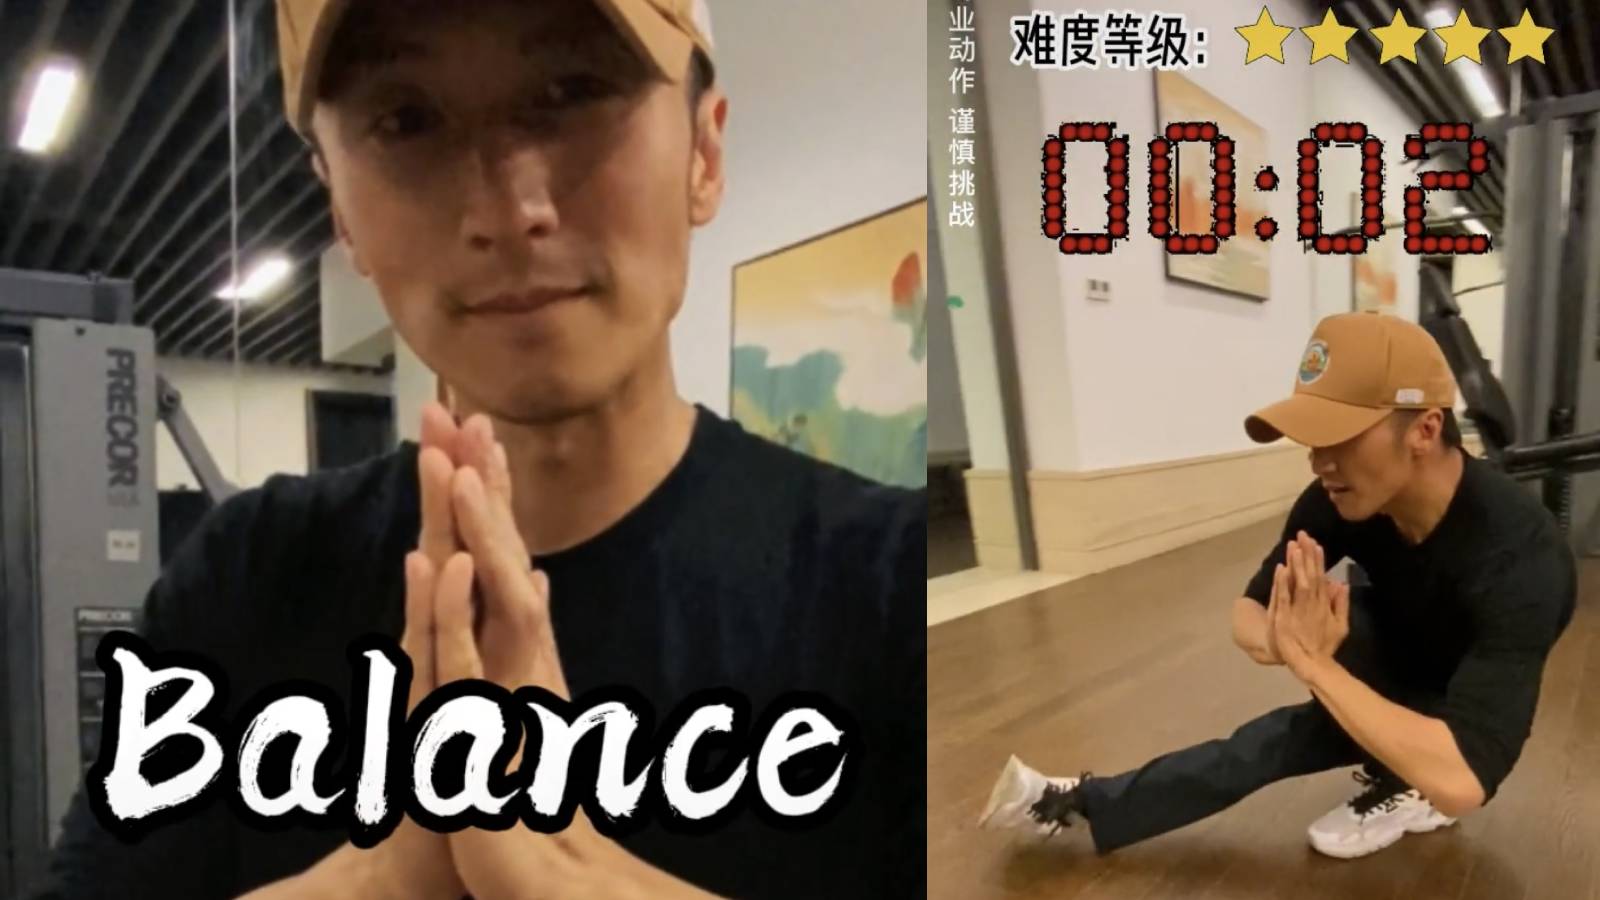 Nicholas Tse Continues Flexing How Fit He Is; Does One-Legged Squat After Fully Rotating His Other Leg